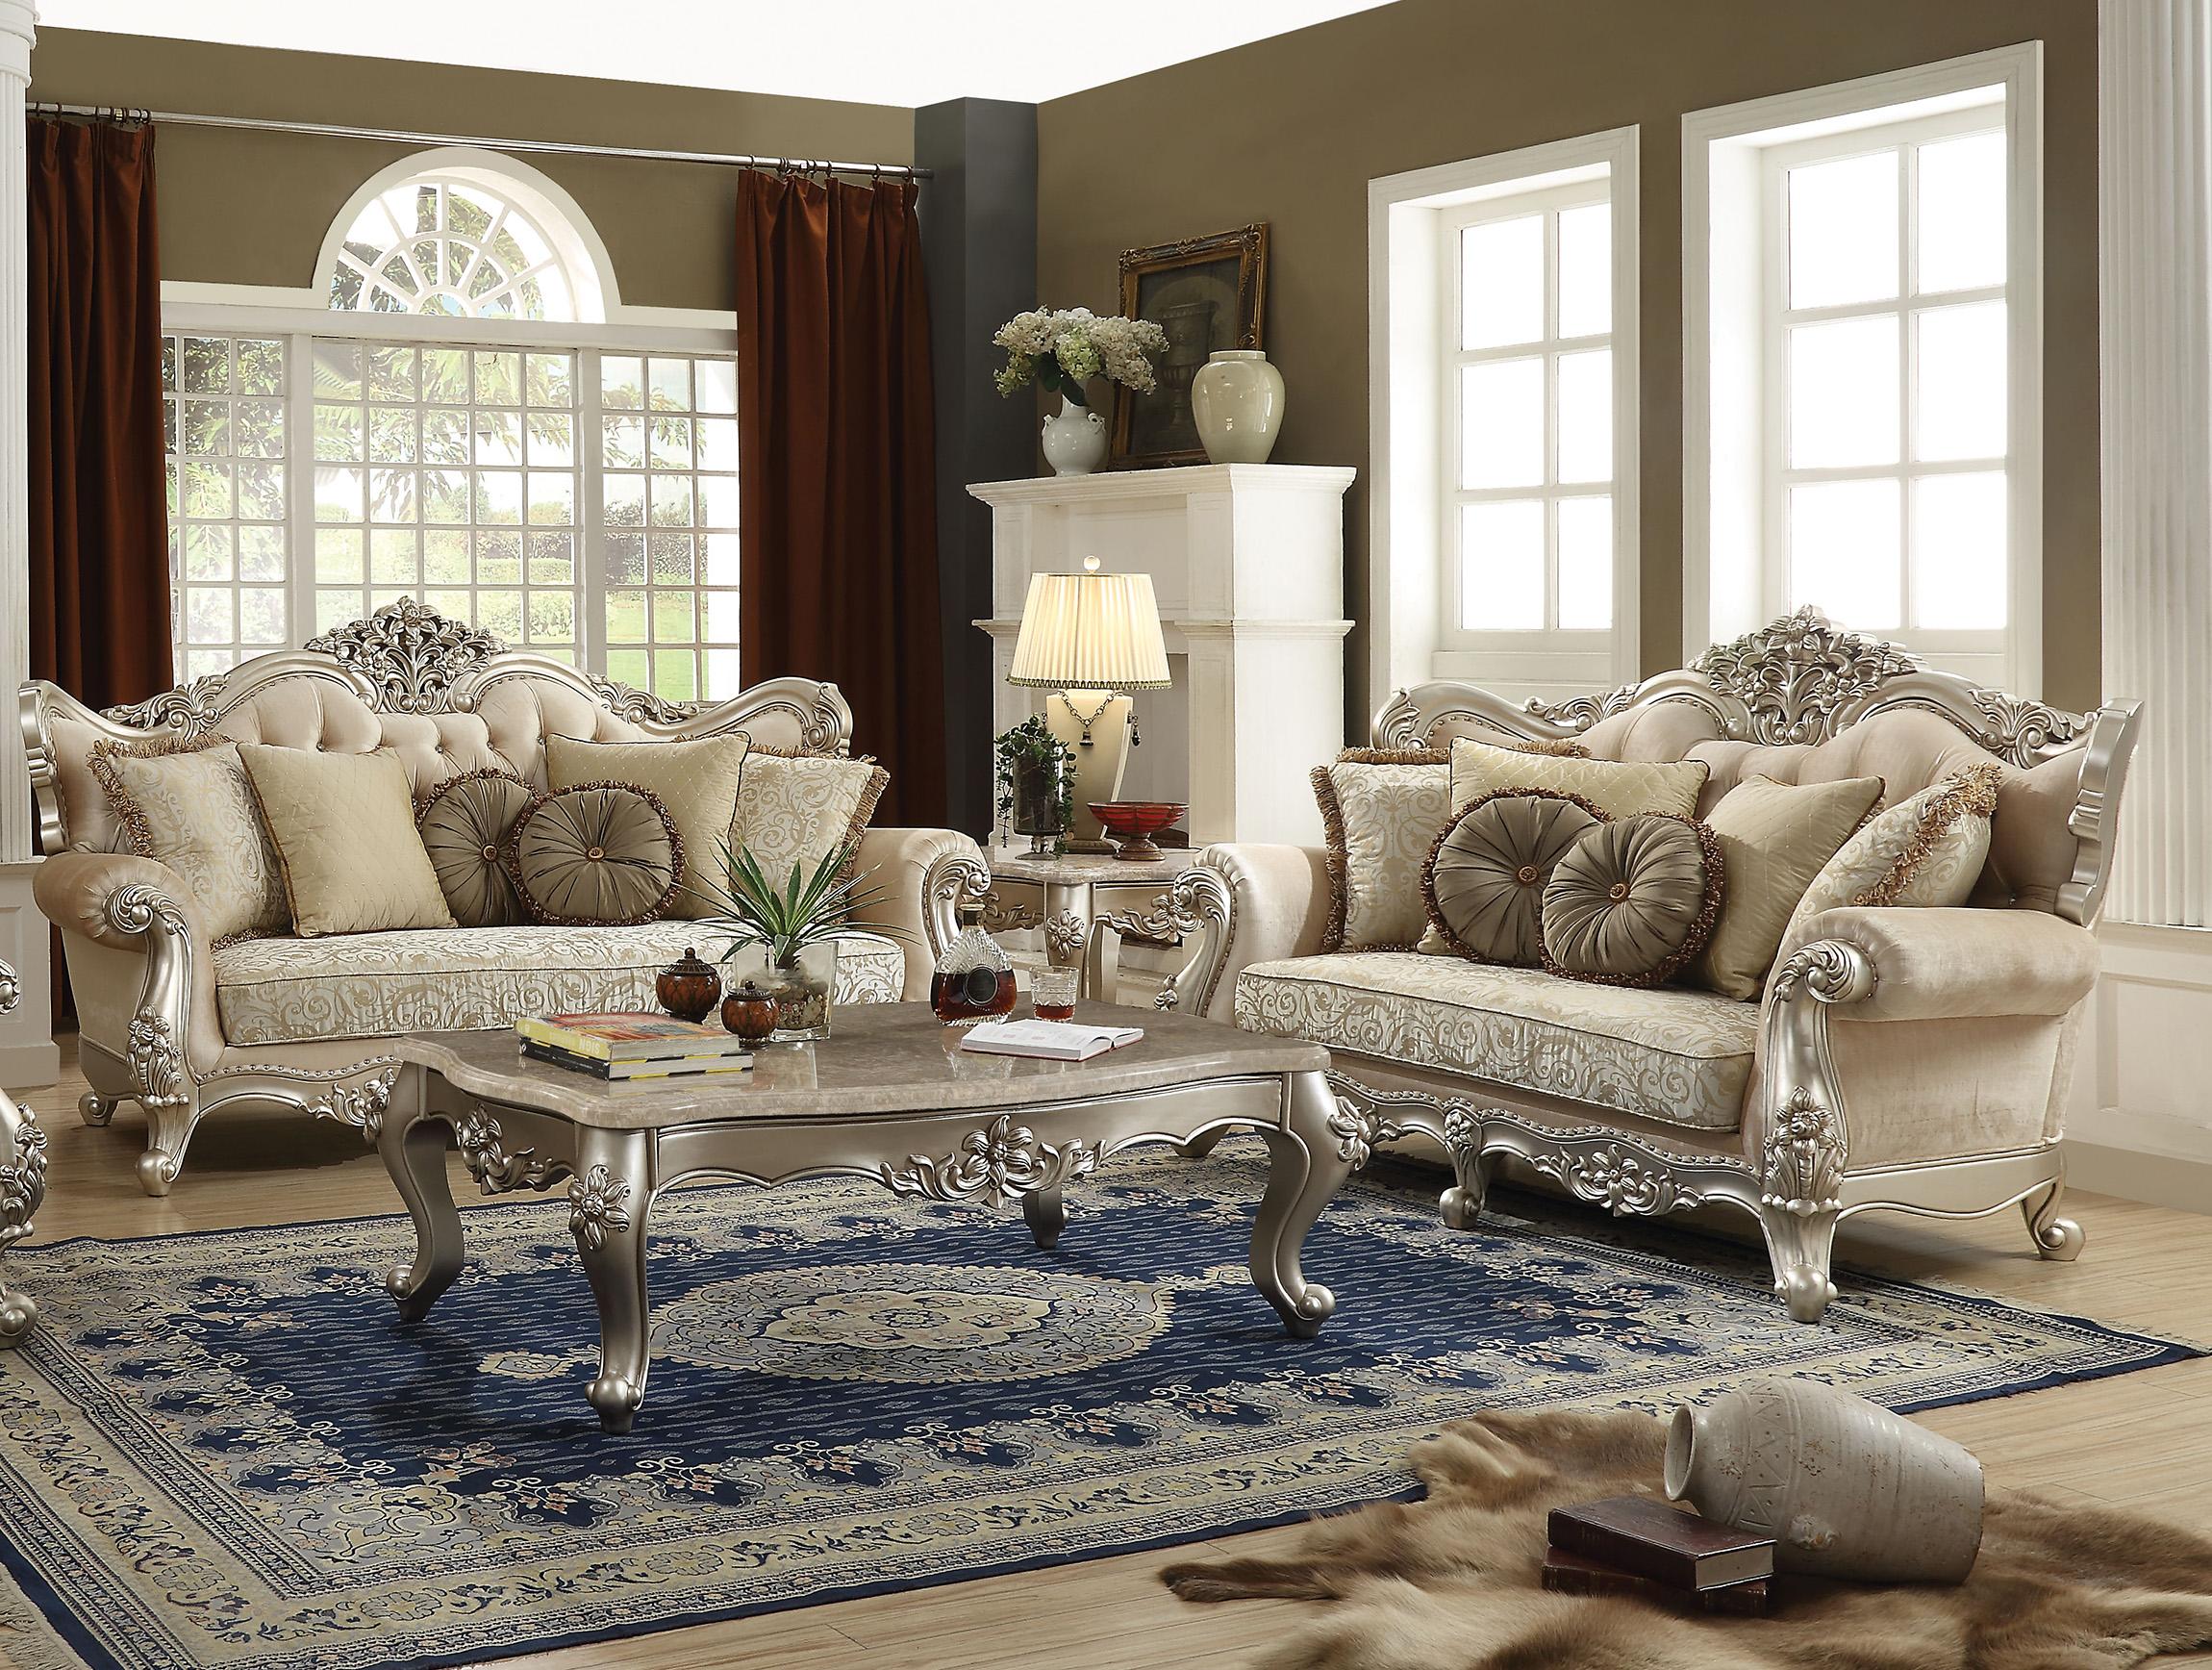 Classic, Traditional Sofa Set Bently 50660 50660-Set-2-Bently in Pearl, Champagne Fabric